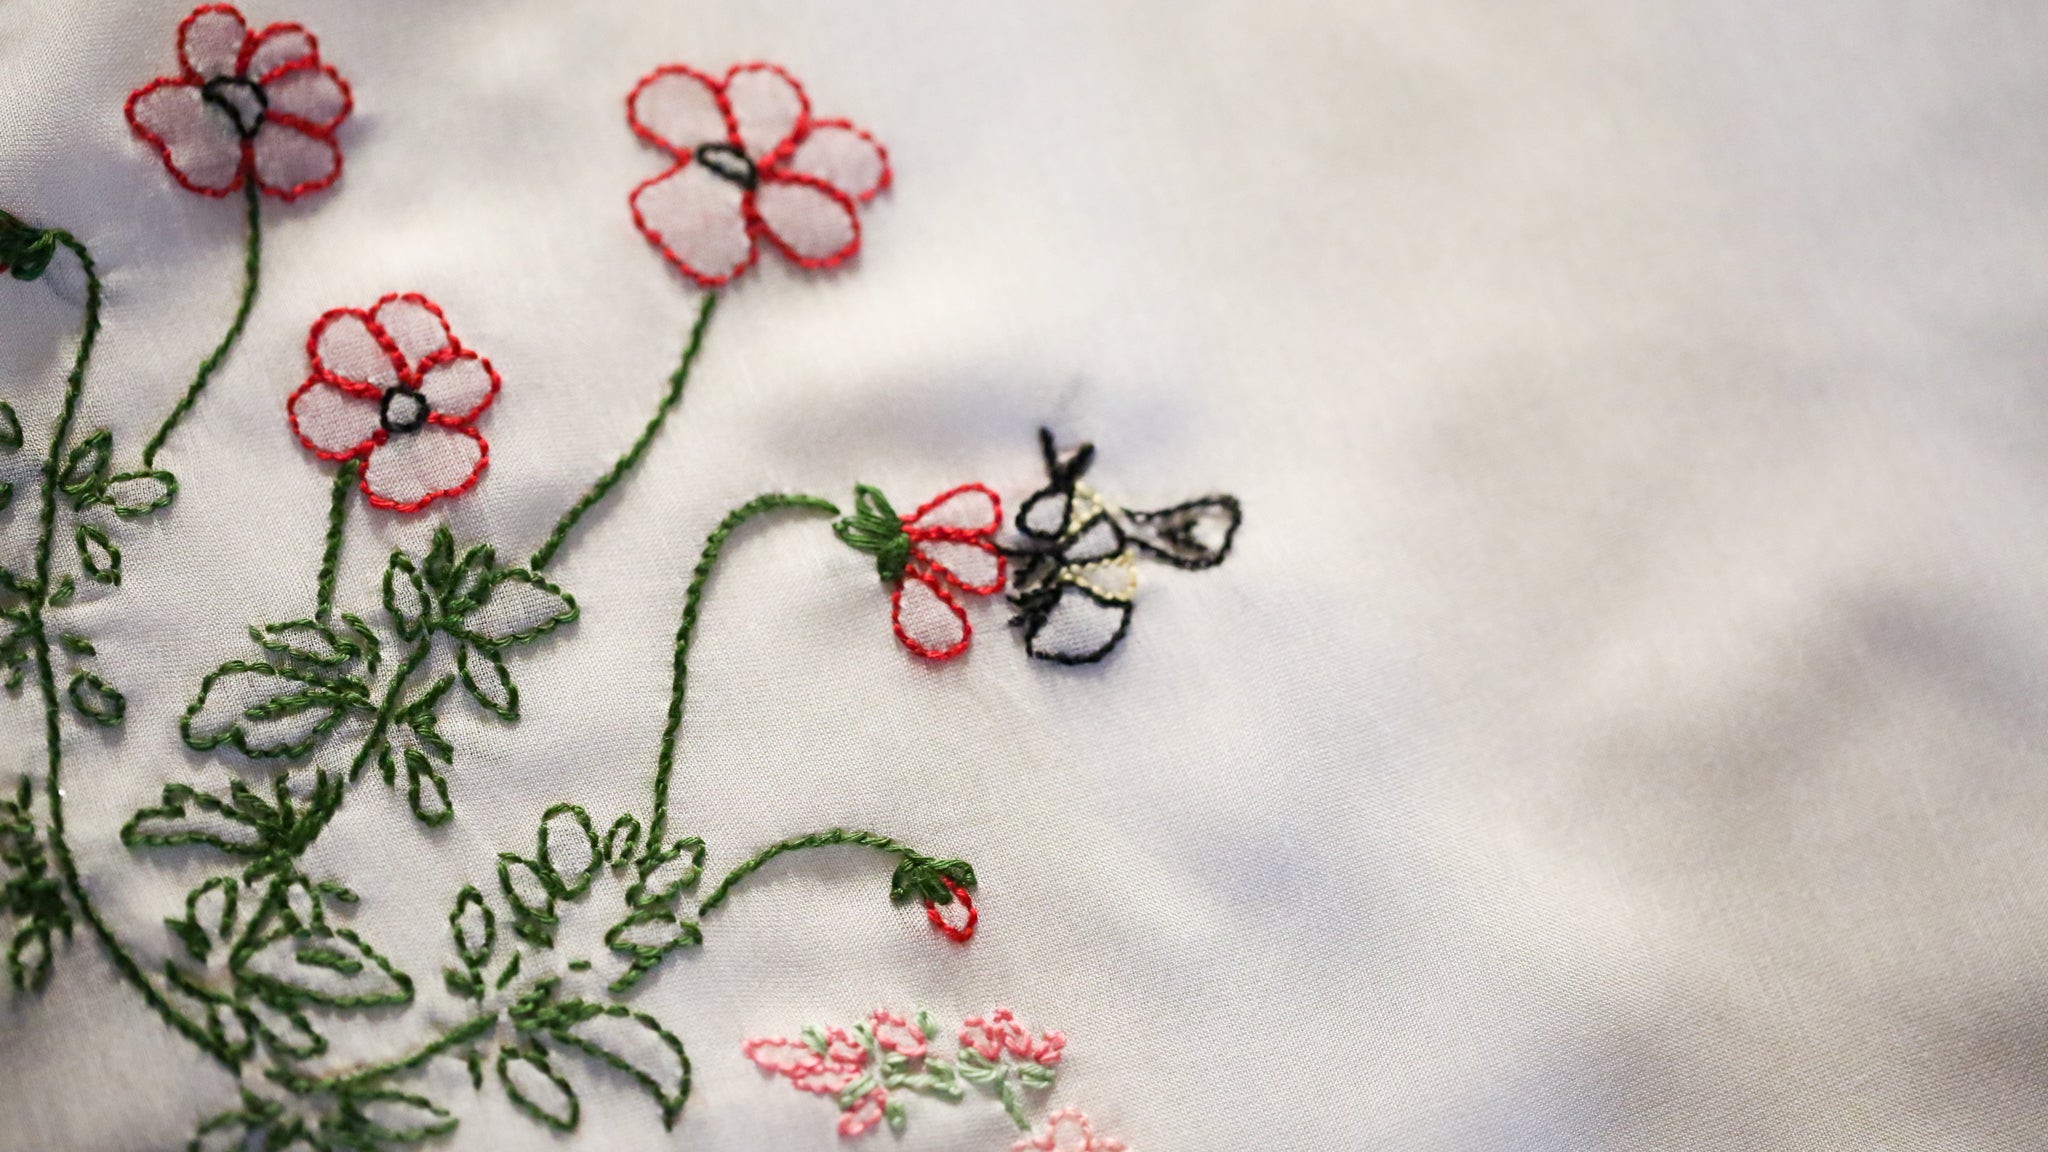 Wildflowers Bouquet / Hand-Stitched Embroidery – Islay's Terrace